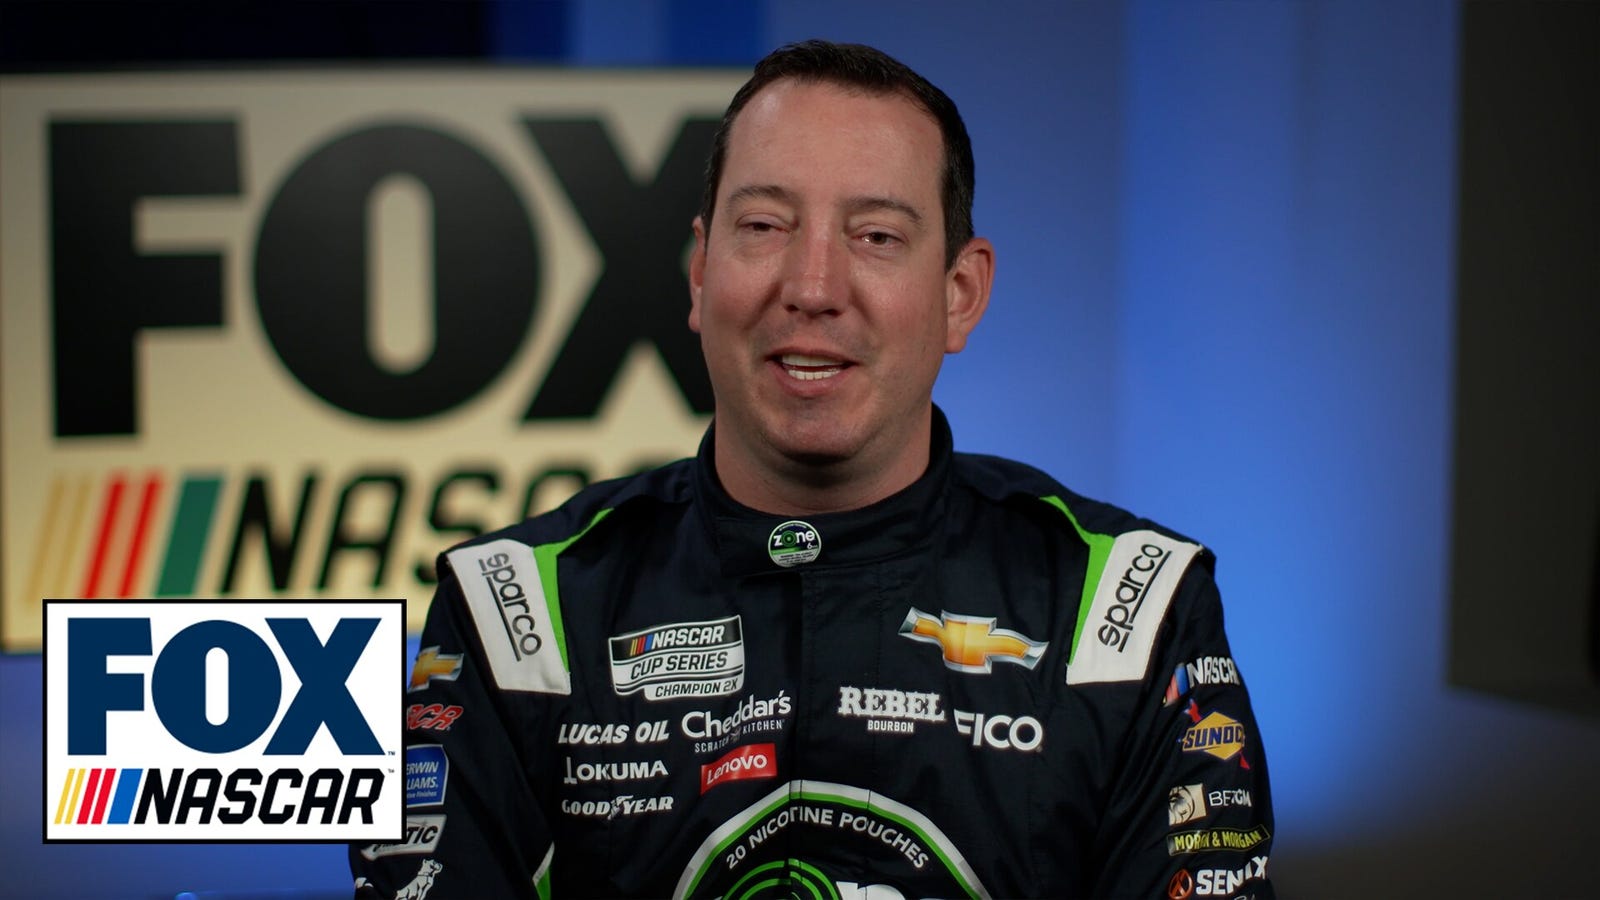 'I would love nothing more' – Kyle Busch on trying to win the Daytona 500